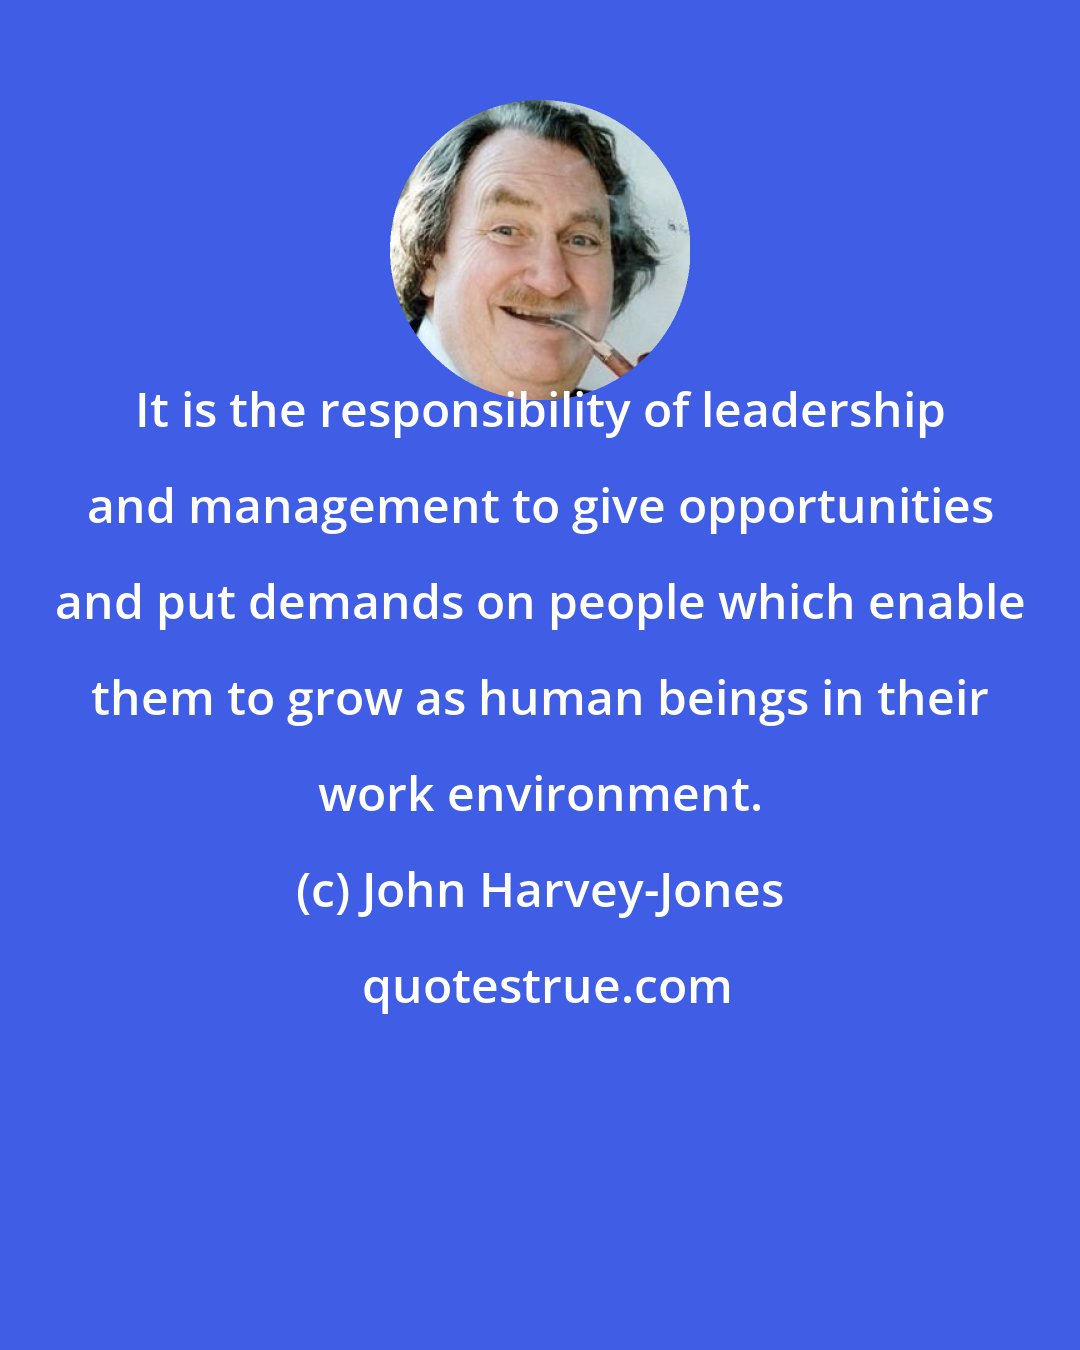 John Harvey-Jones: It is the responsibility of leadership and management to give opportunities and put demands on people which enable them to grow as human beings in their work environment.